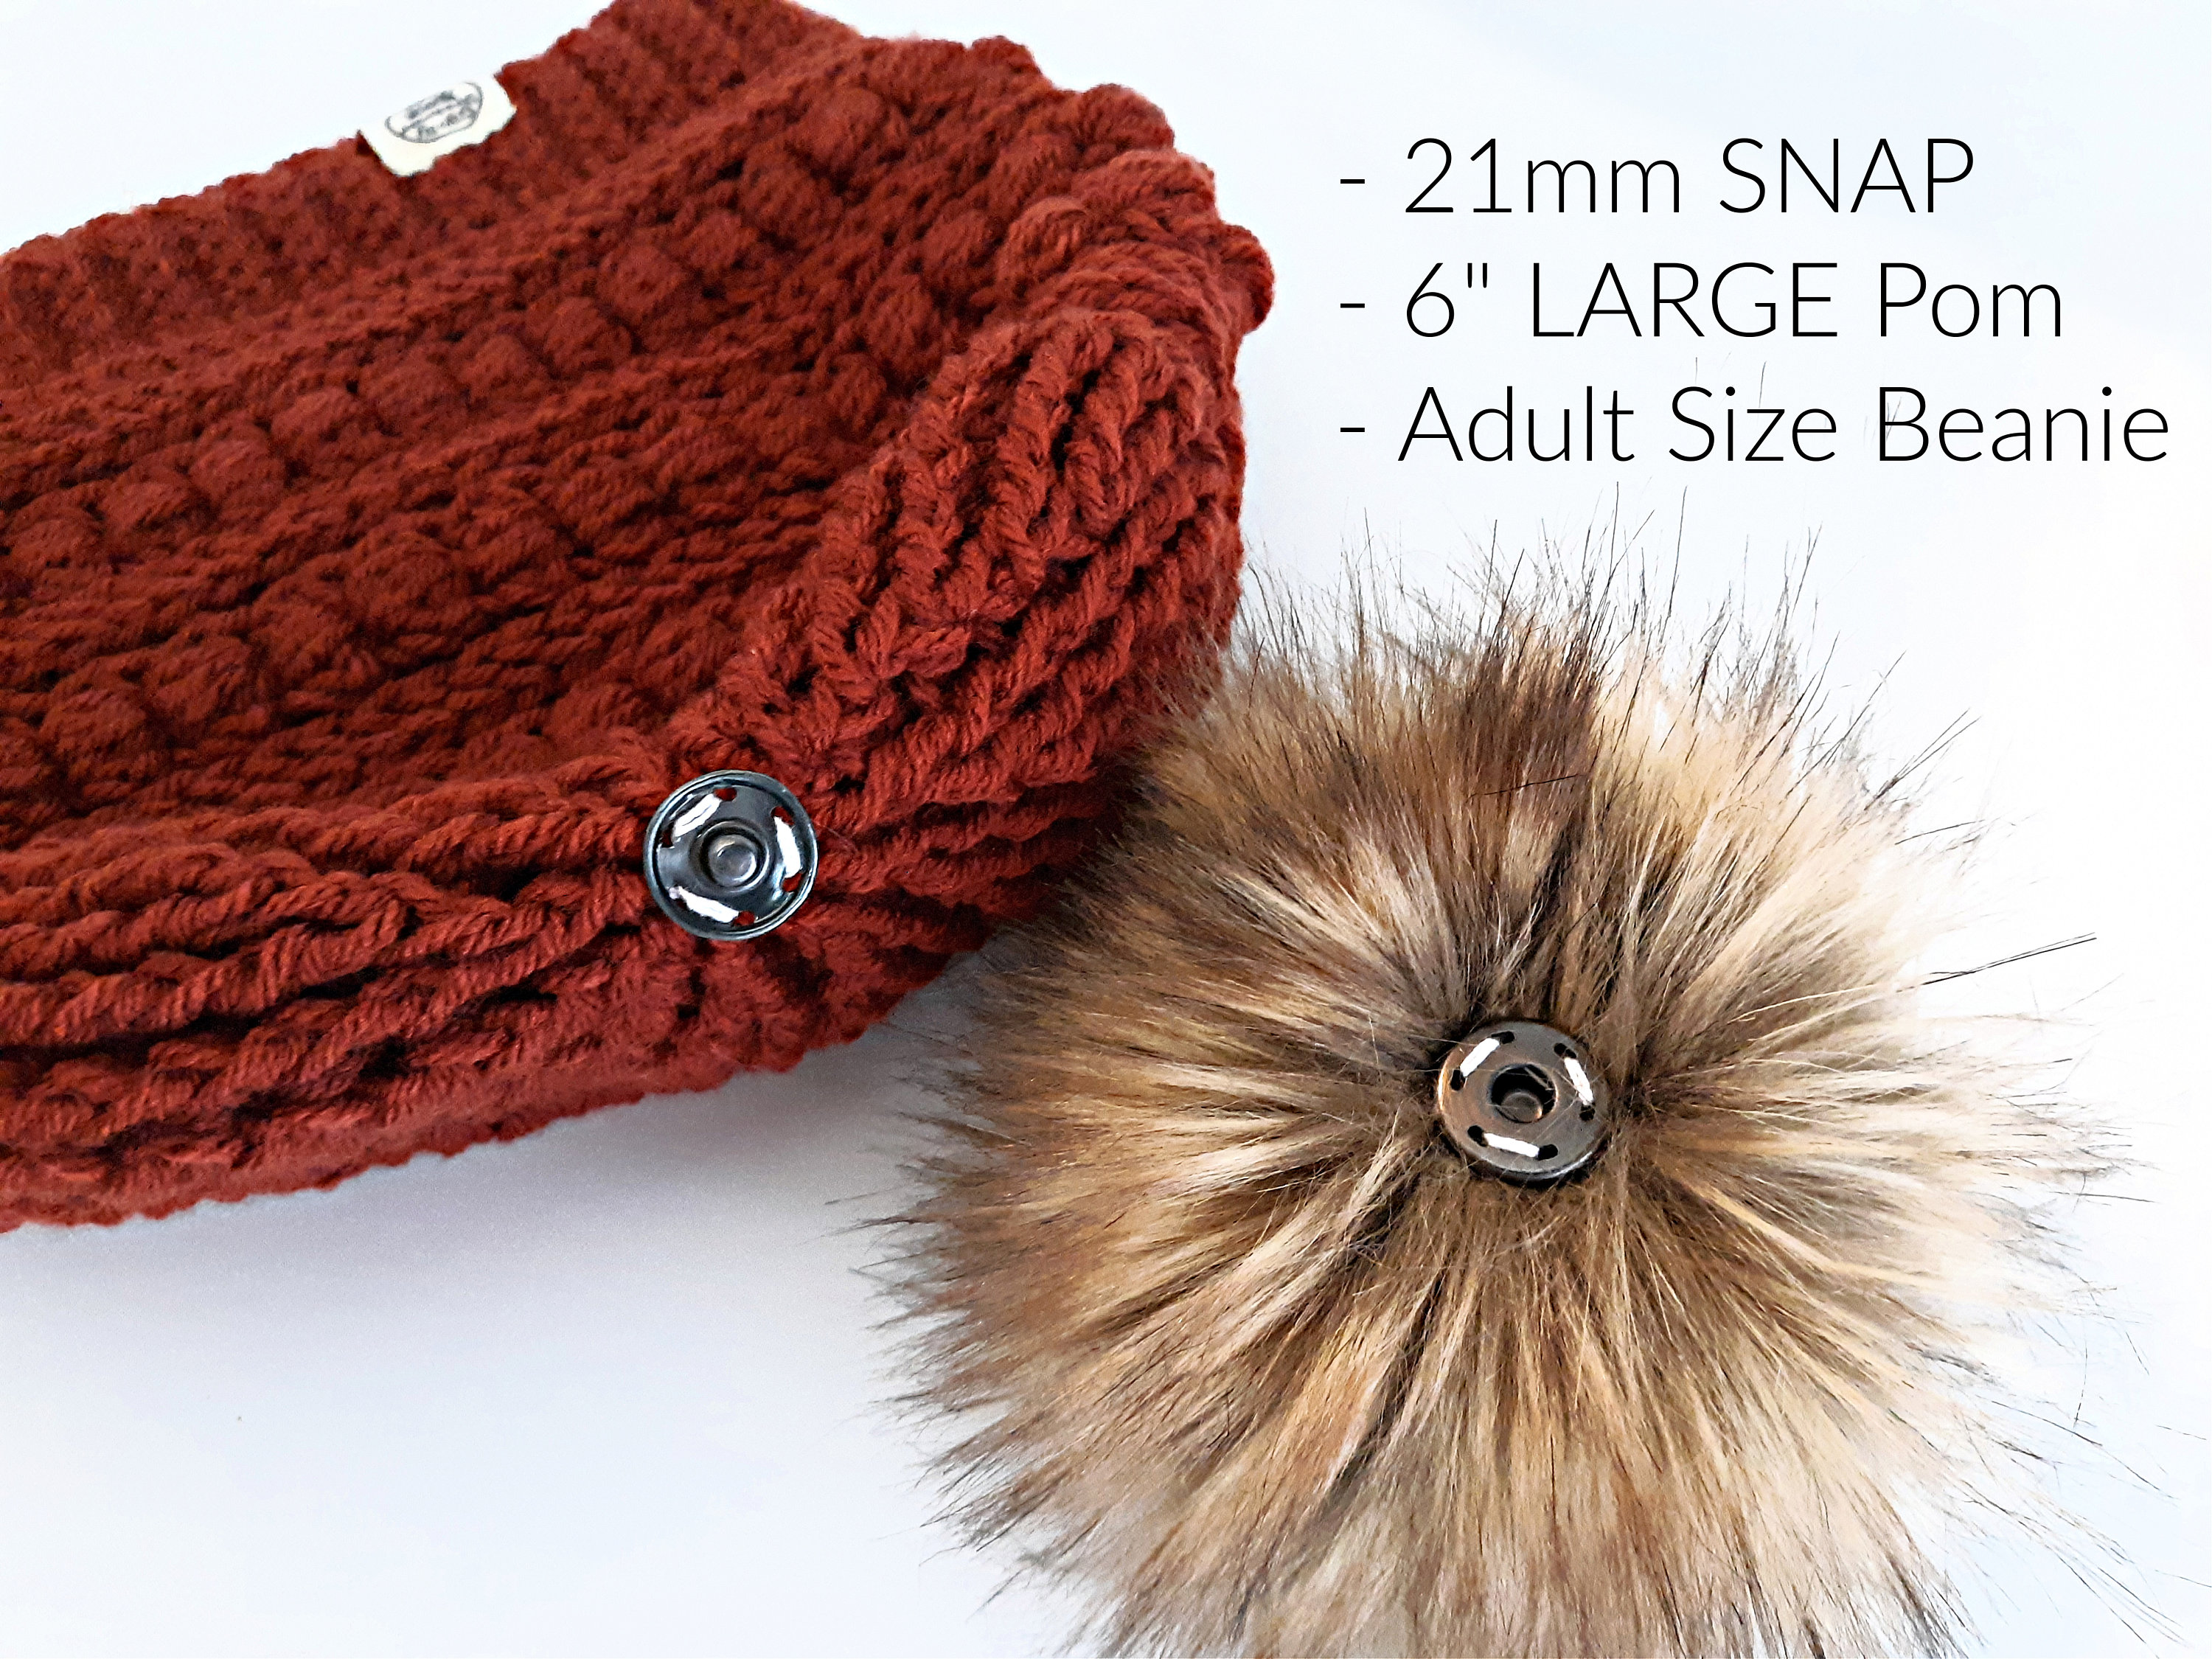 5” Diameter Fur Pom Pom with Press Snap Button for Knitted Hat Beanie Hats  (Orange top)